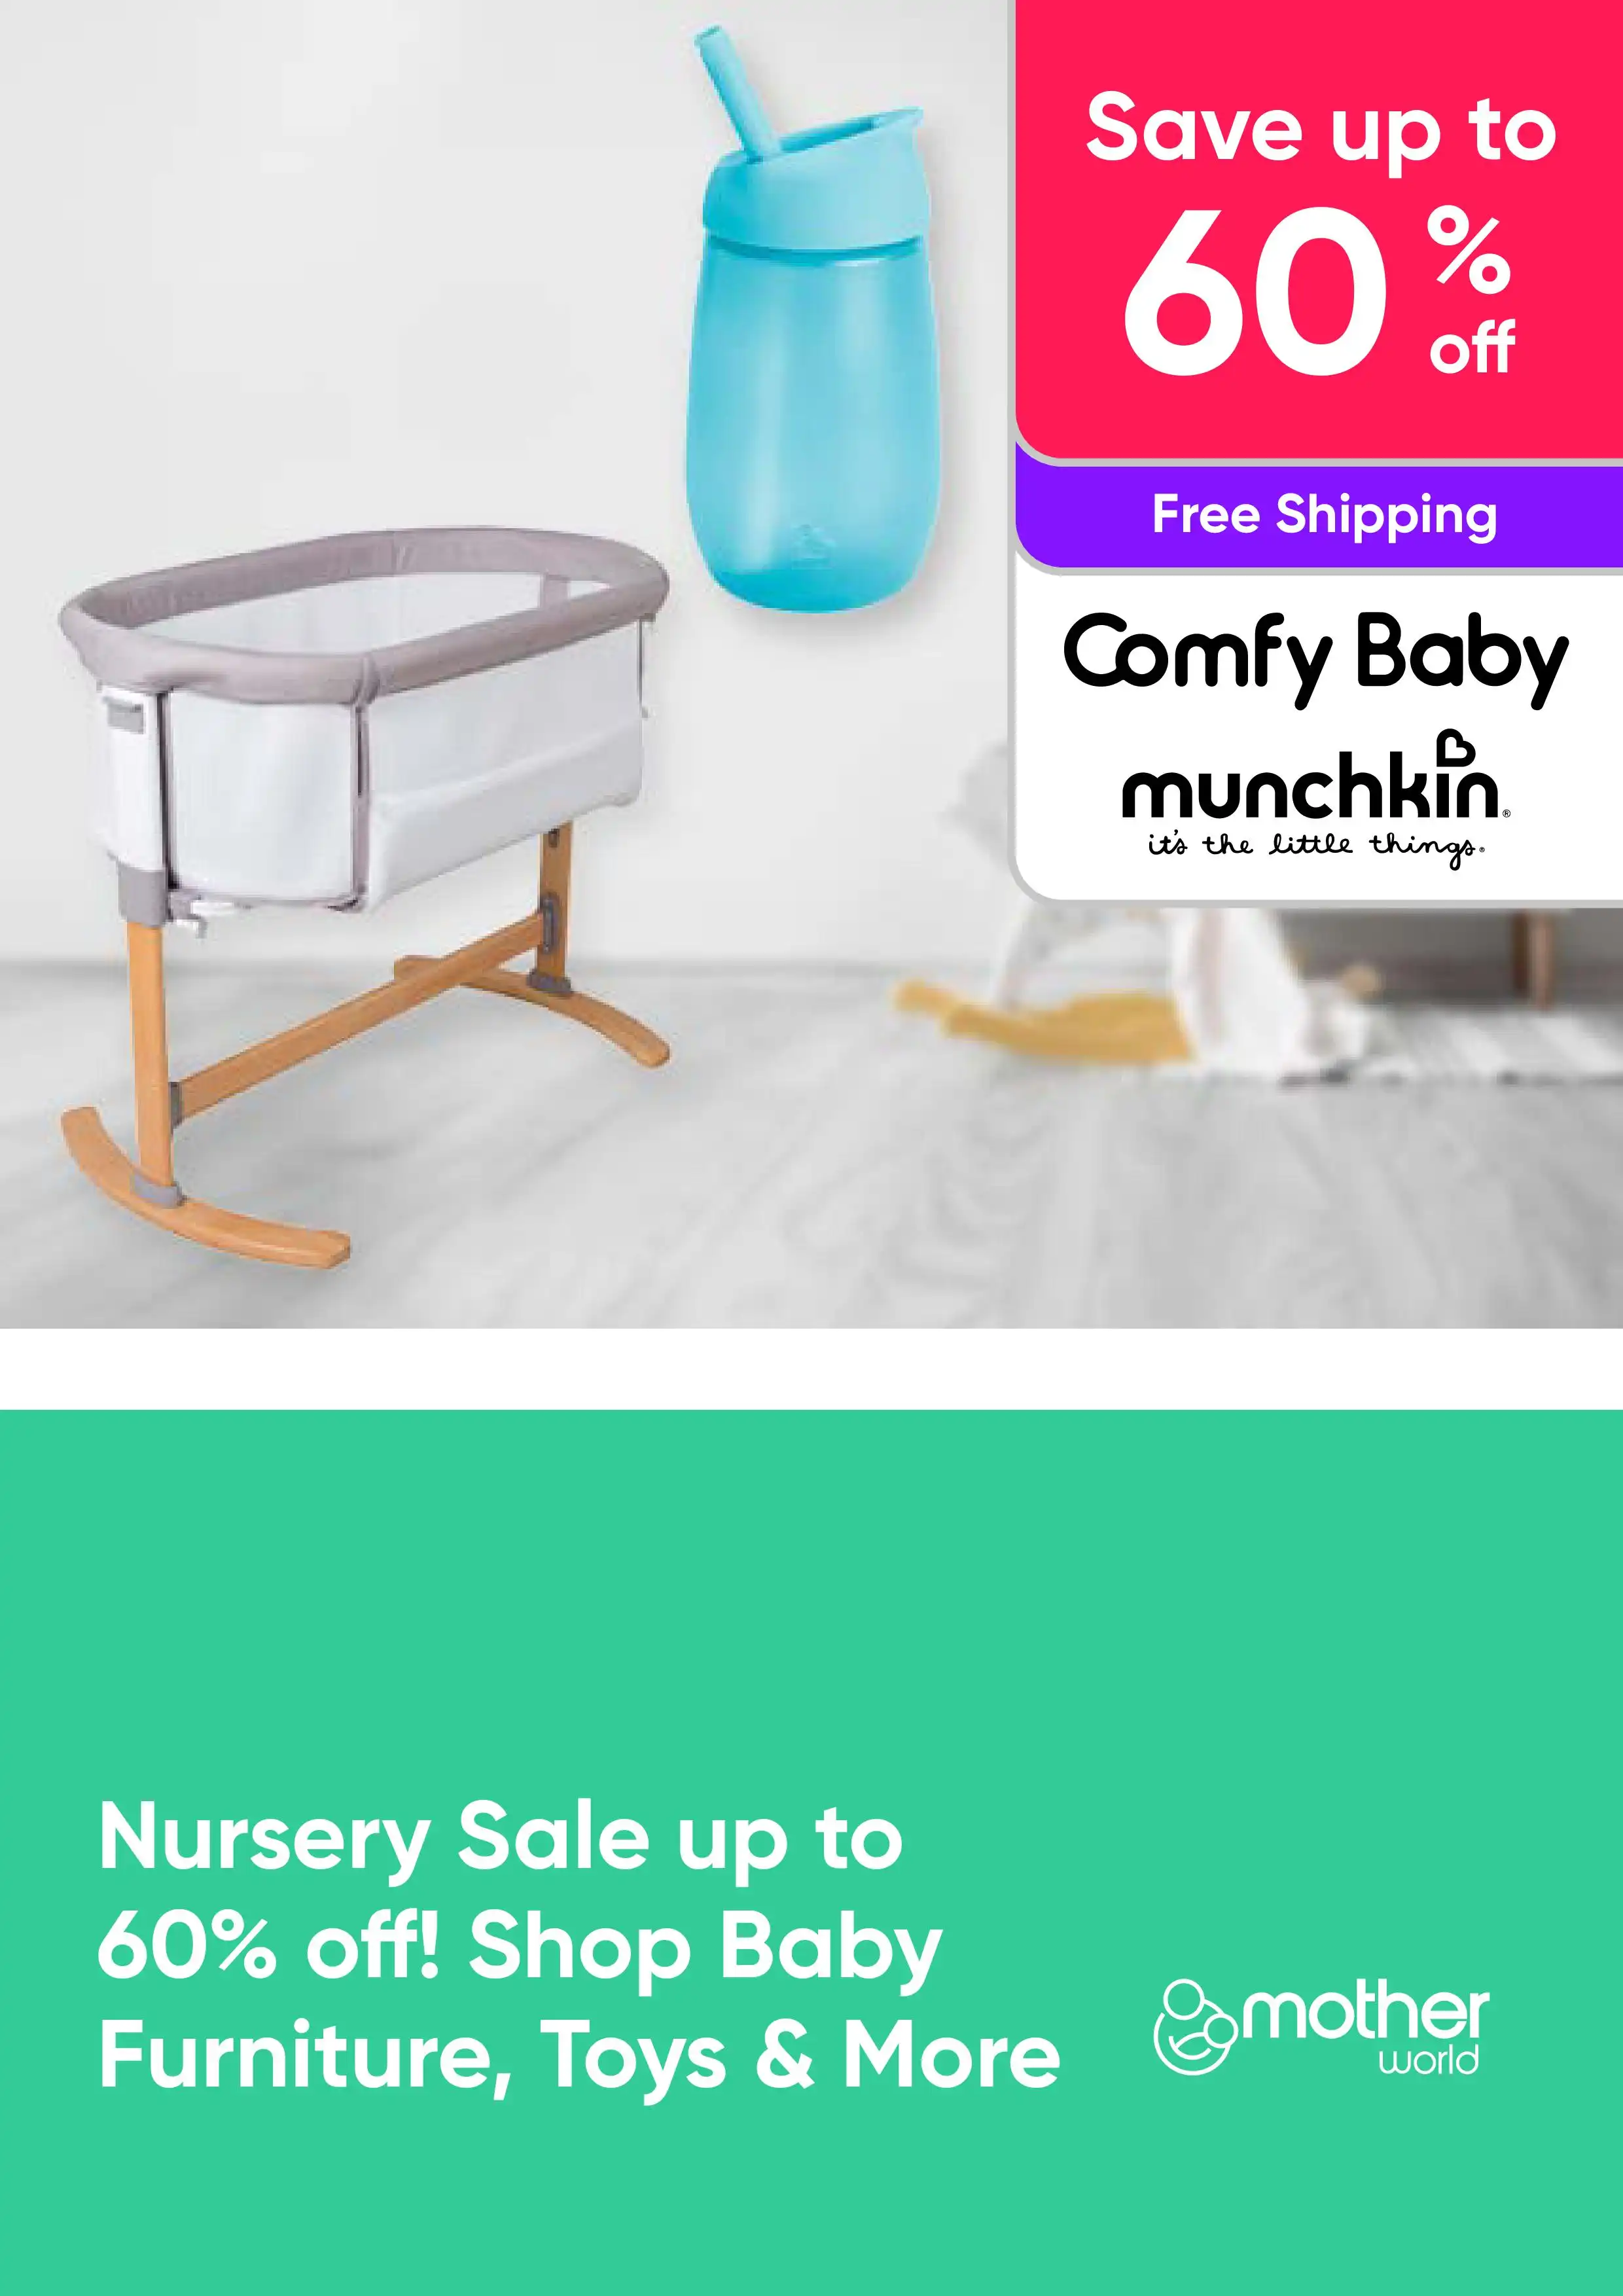 Nursery Sale up to 60% off! Shop Baby, Furniture, Toys & more